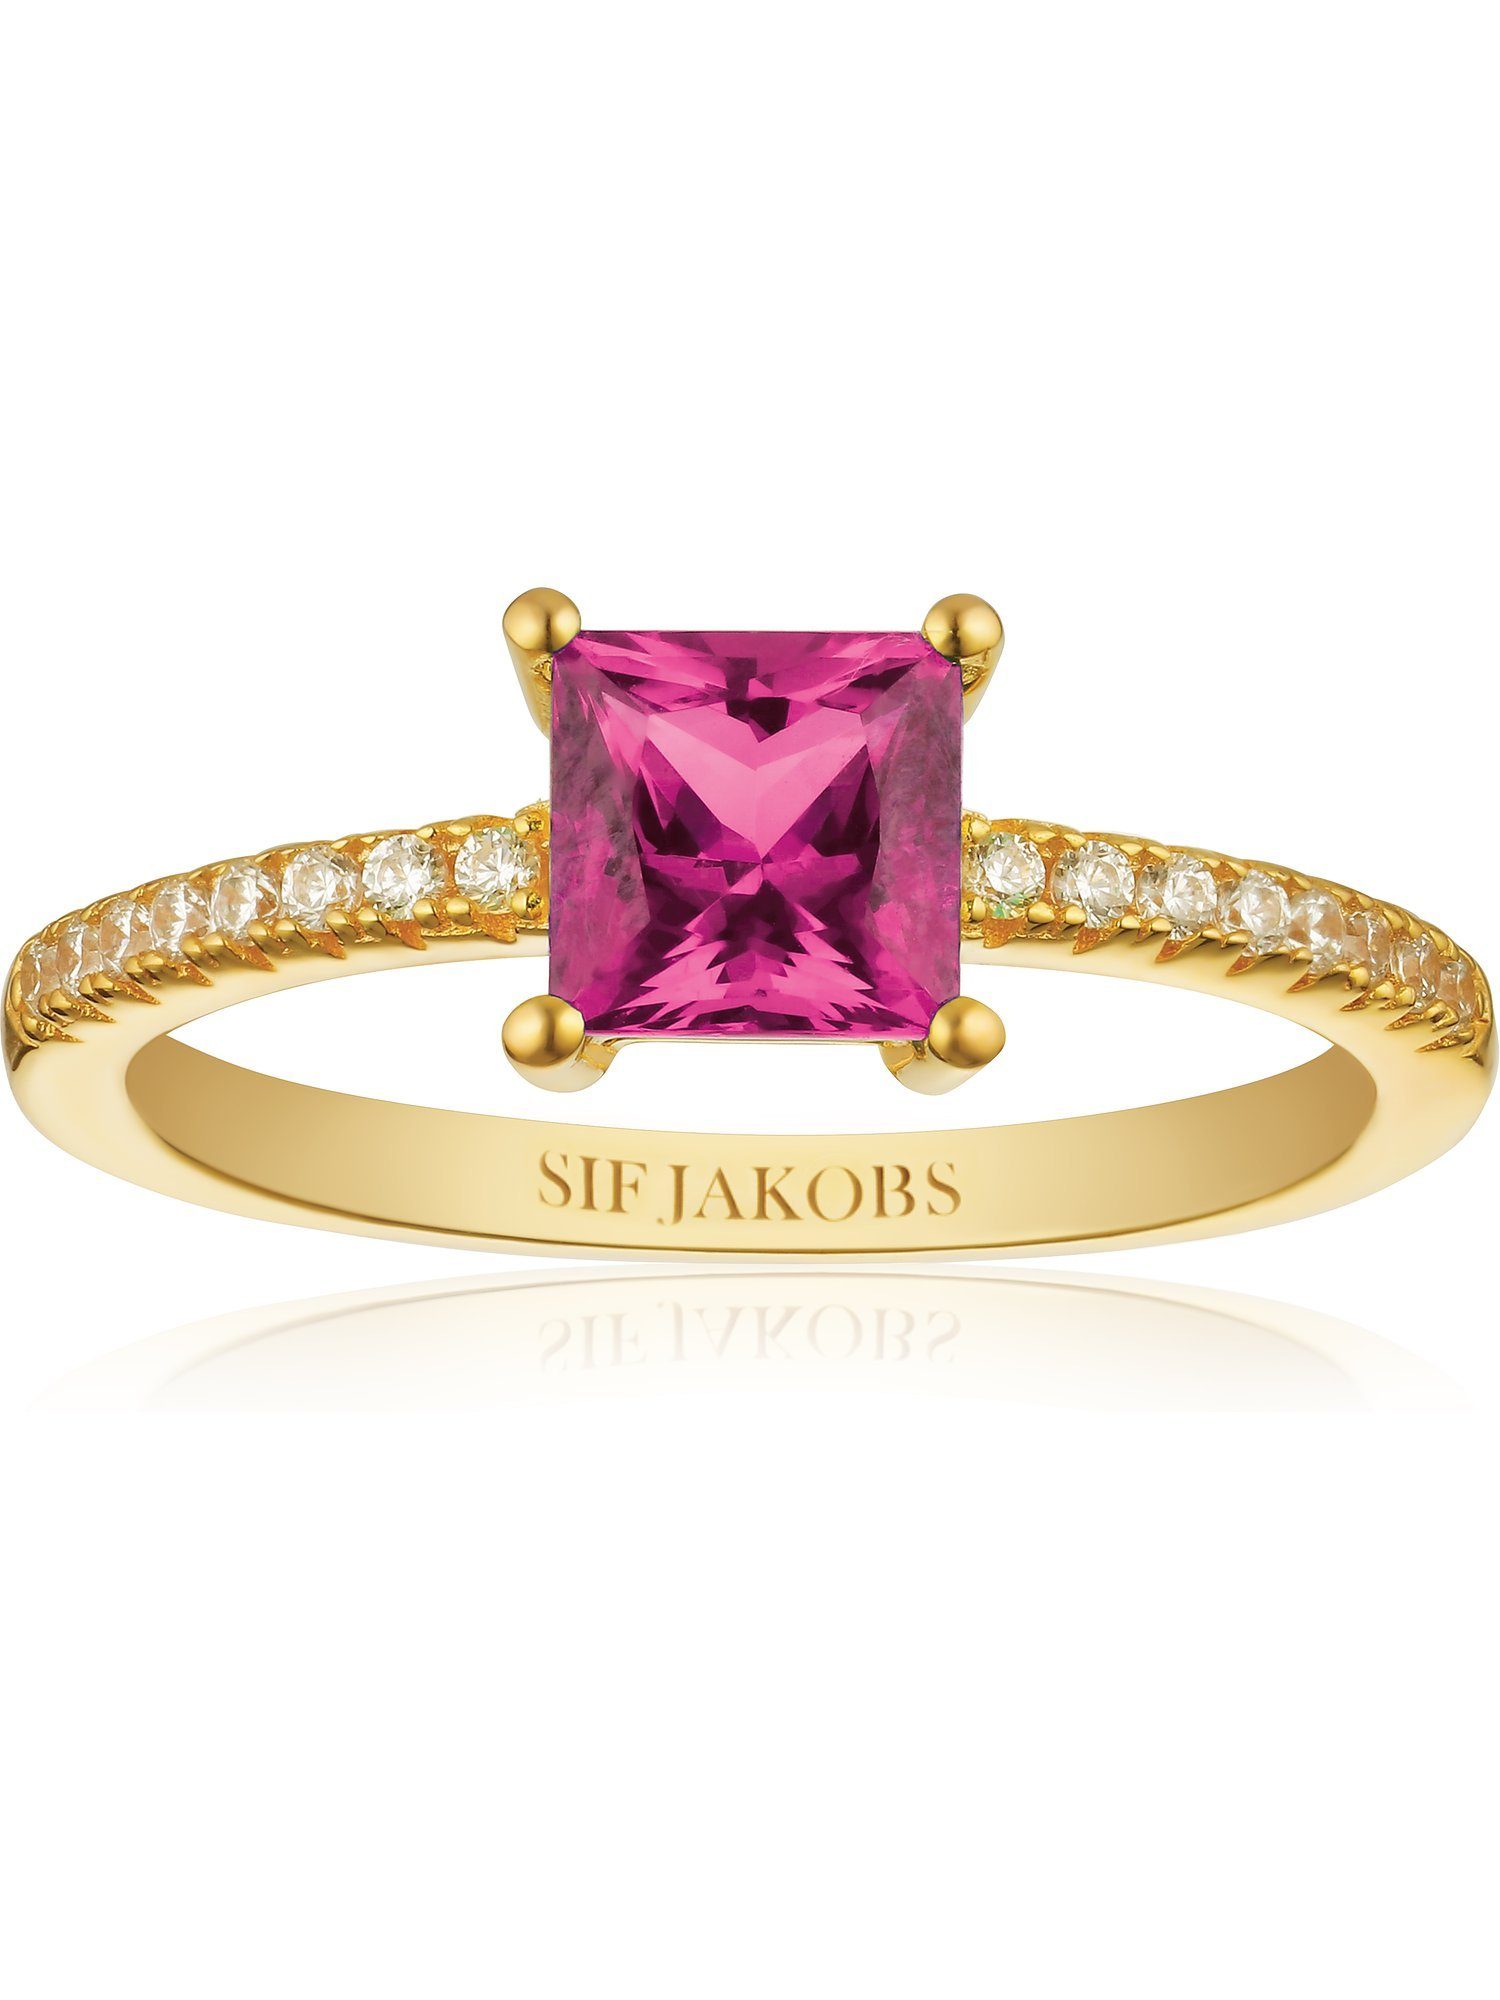 Sif Jakobs Jewellery Silberring gold, rosa